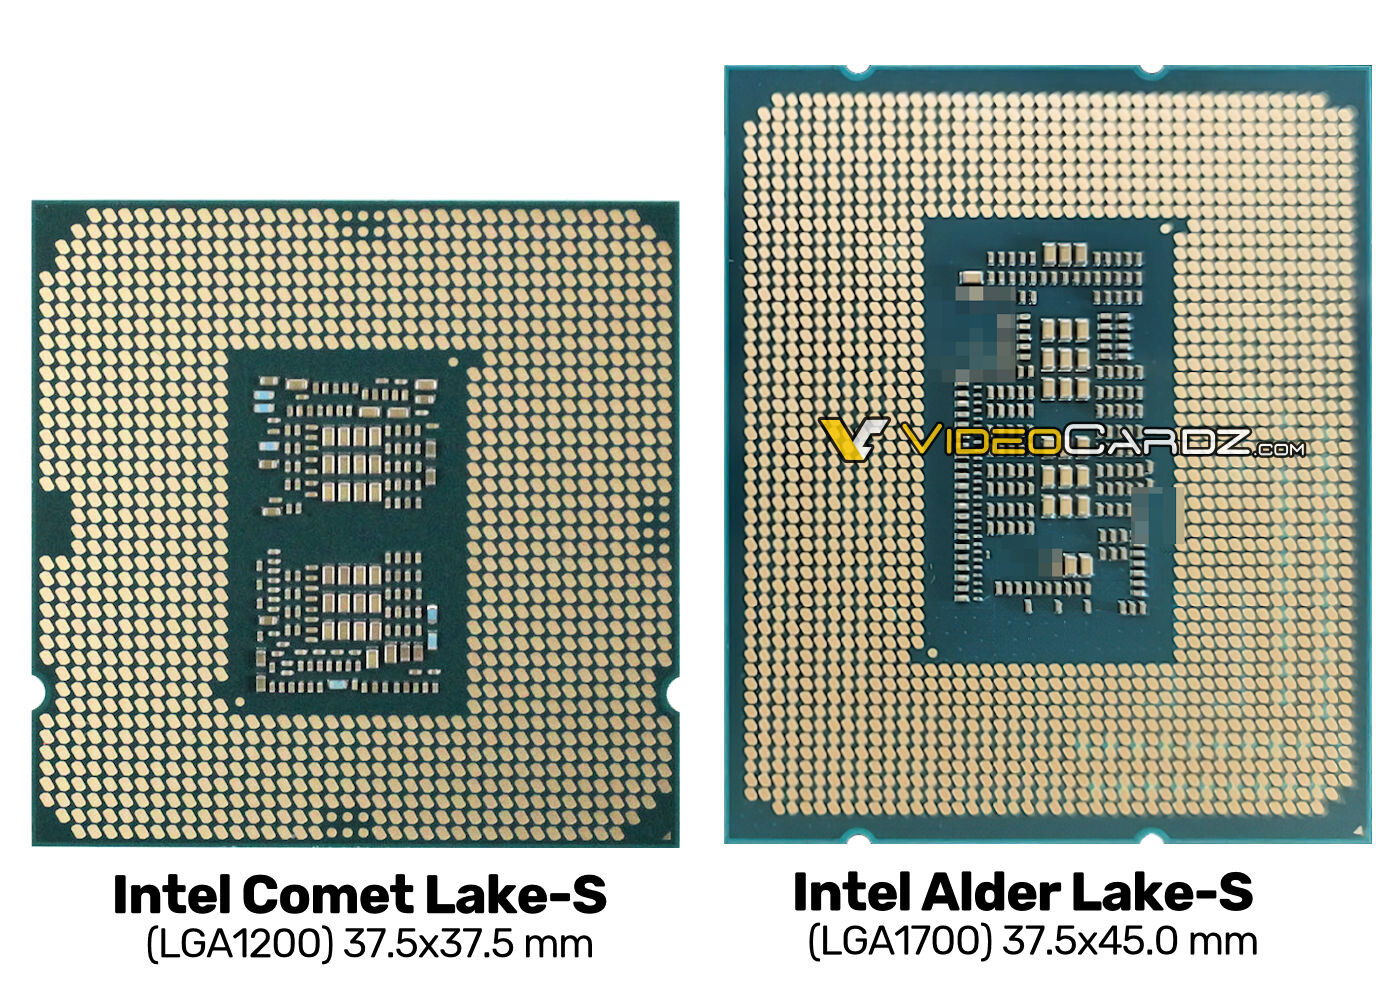 LGA 1700 socket won't be compatible with current coolers 